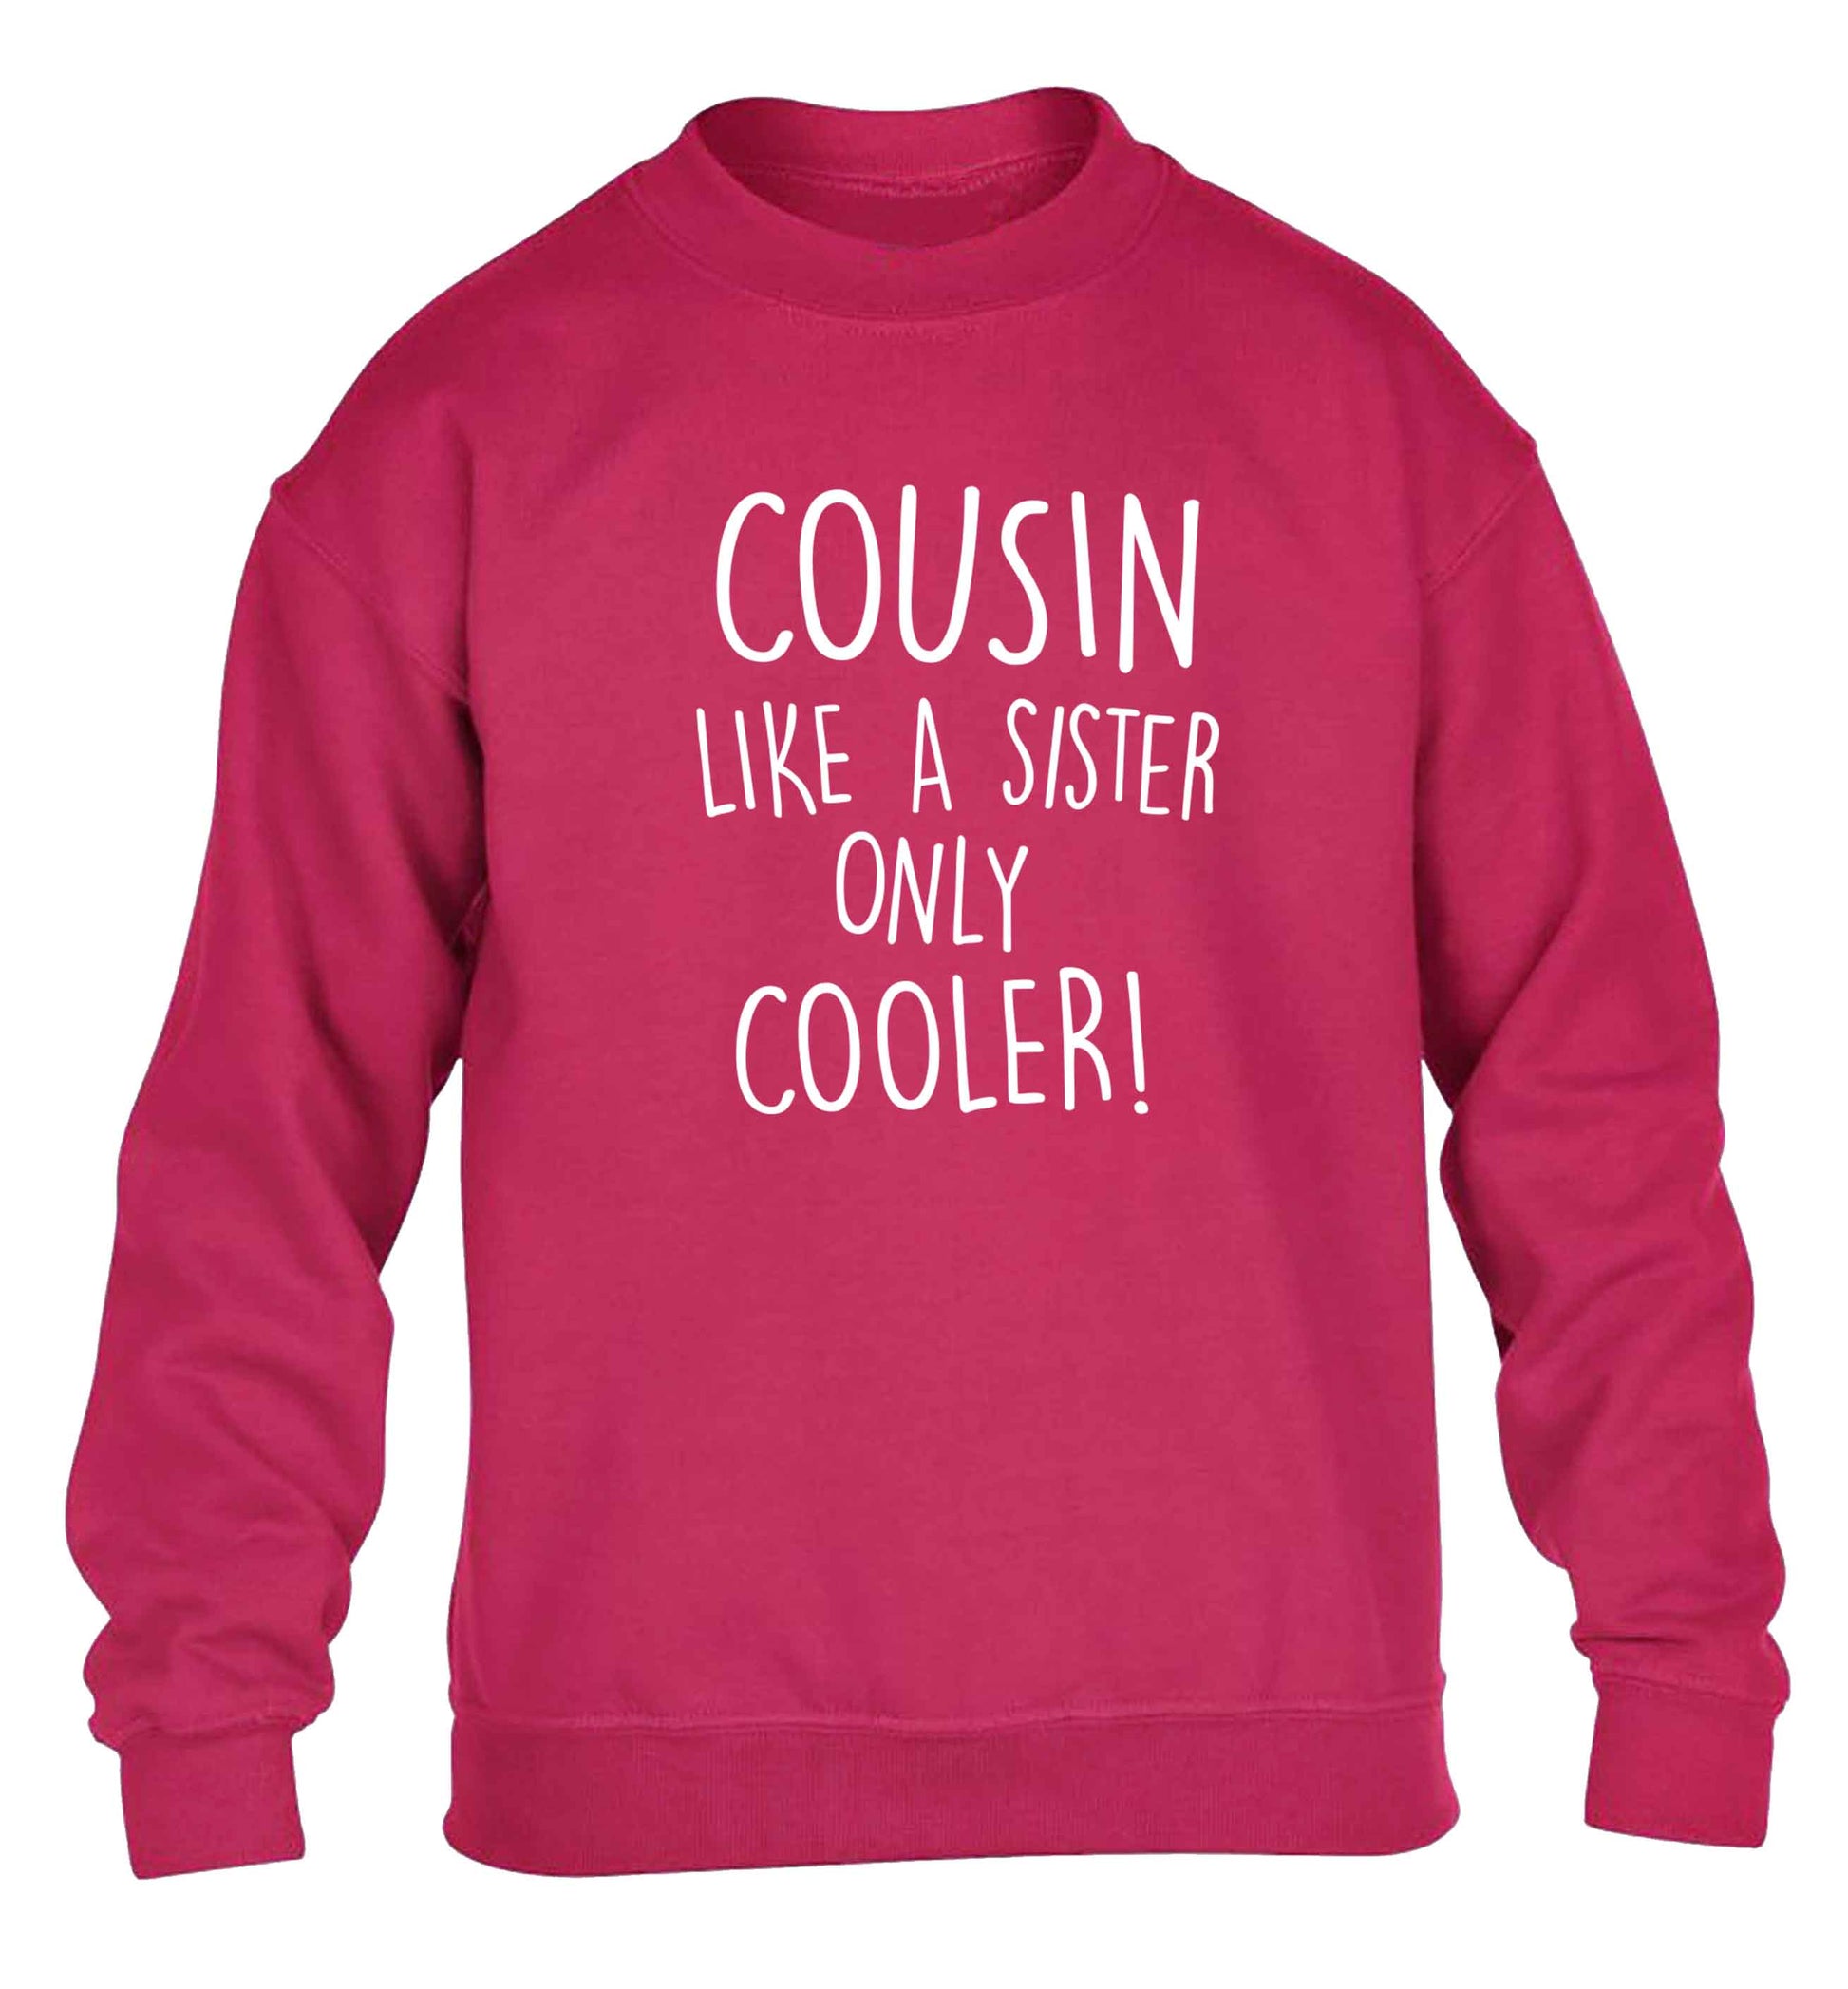 Cousin like a sister only cooler children's pink sweater 12-13 Years